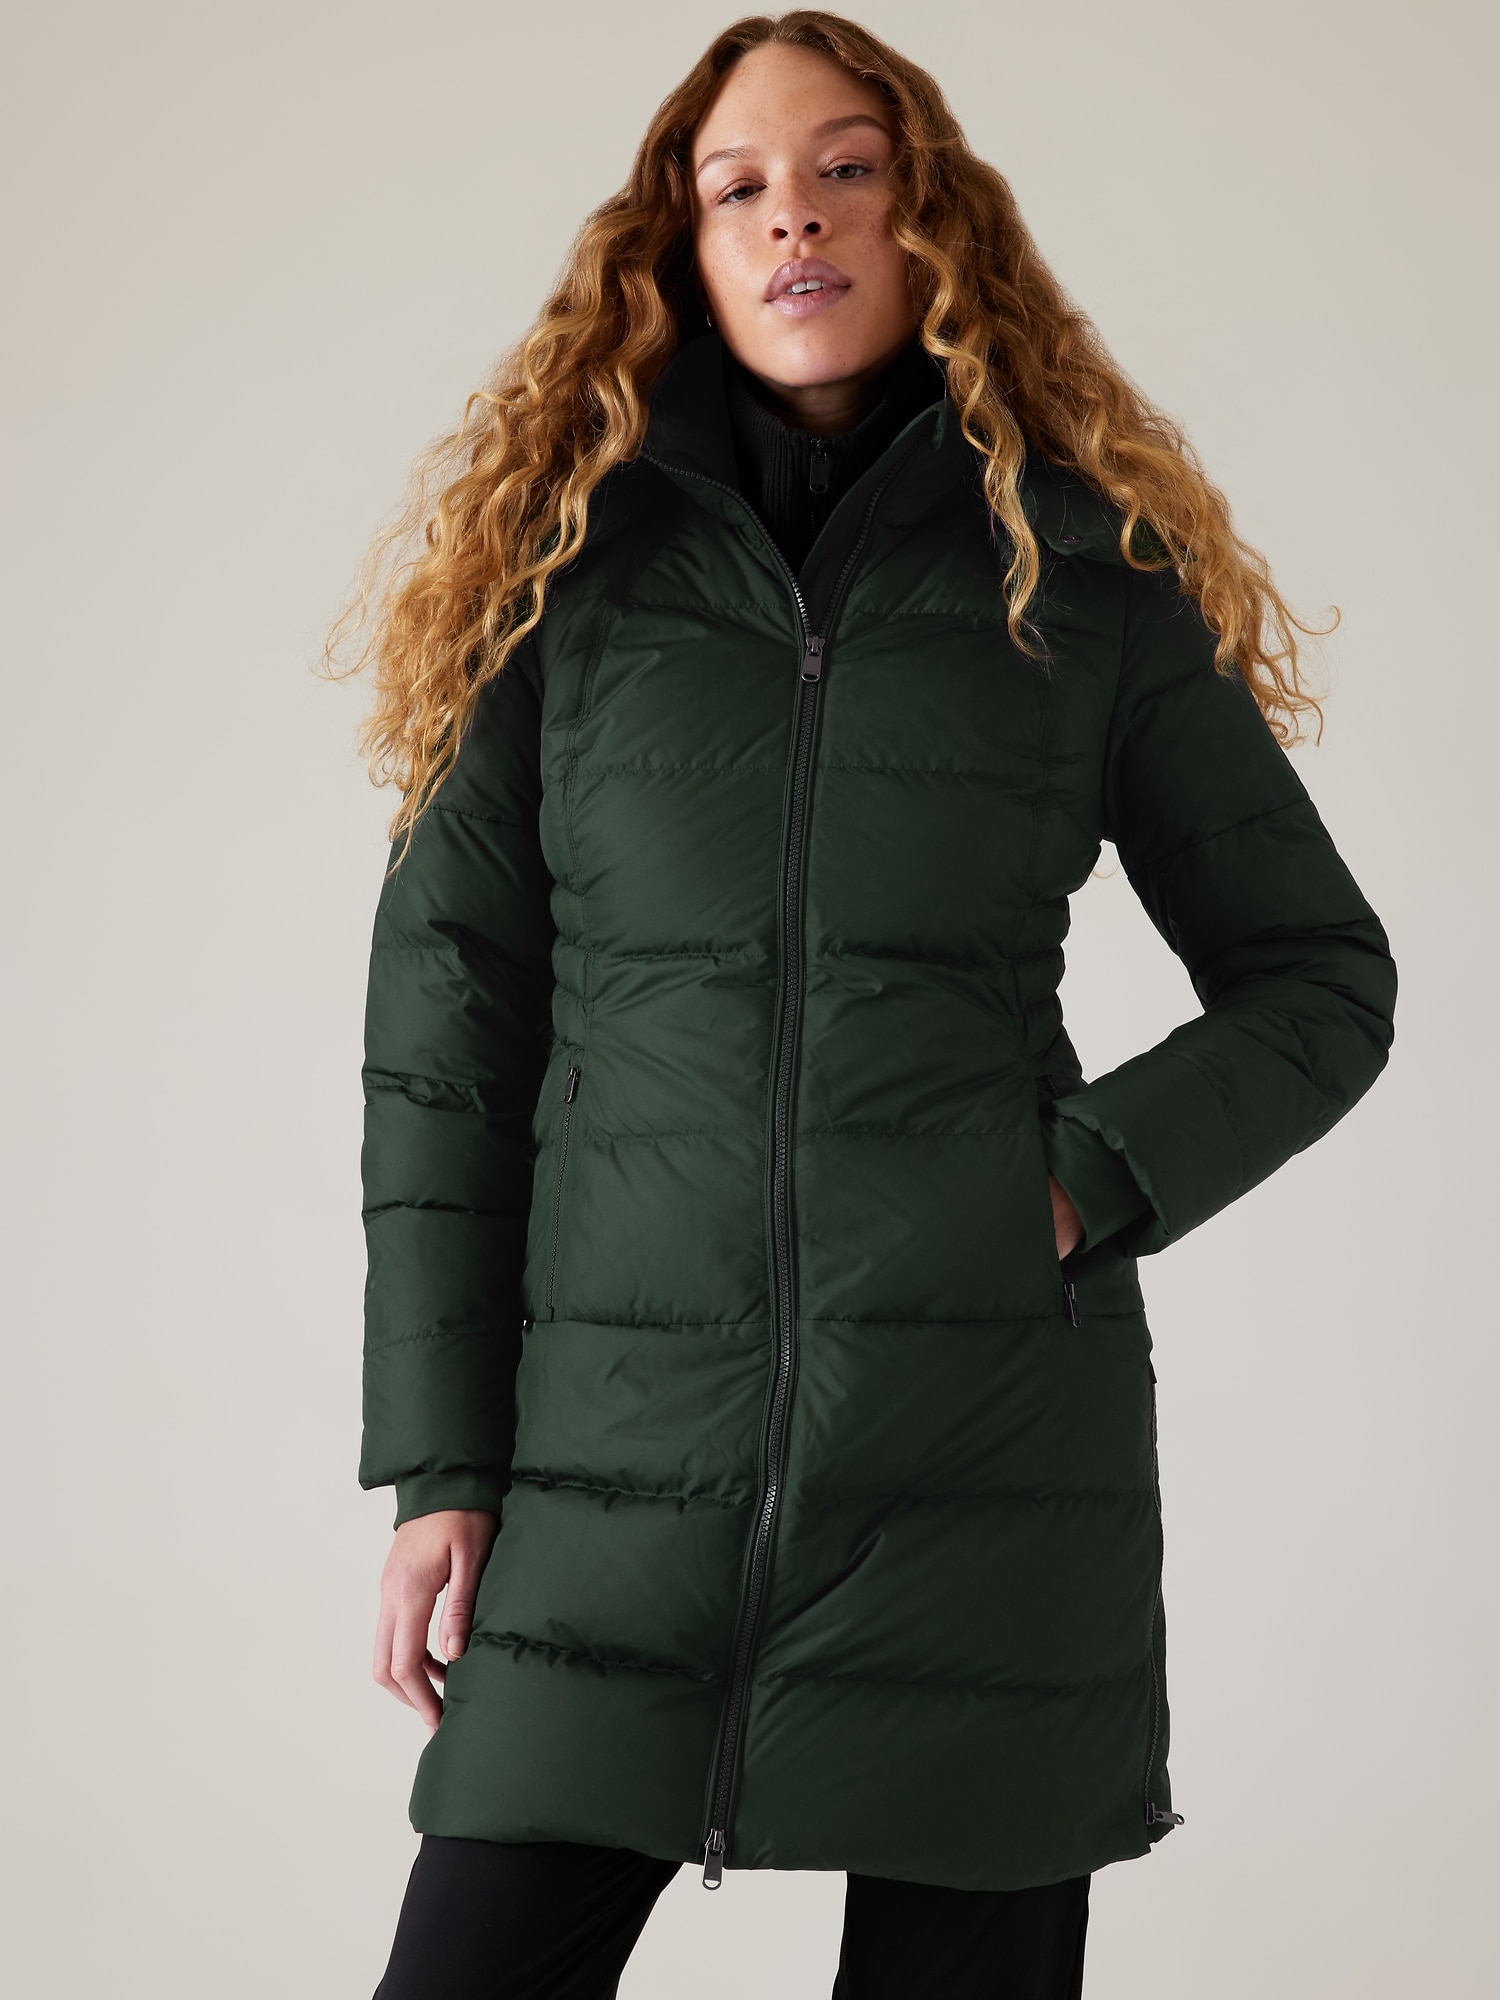 Classic parka coat has become wardrobe icon. Versatile functional and  stylish. Girl wear parka while walk park. Puffer jacket with hood. Woman  wear black parka fur hood. Youth hipster fashion concept Stock